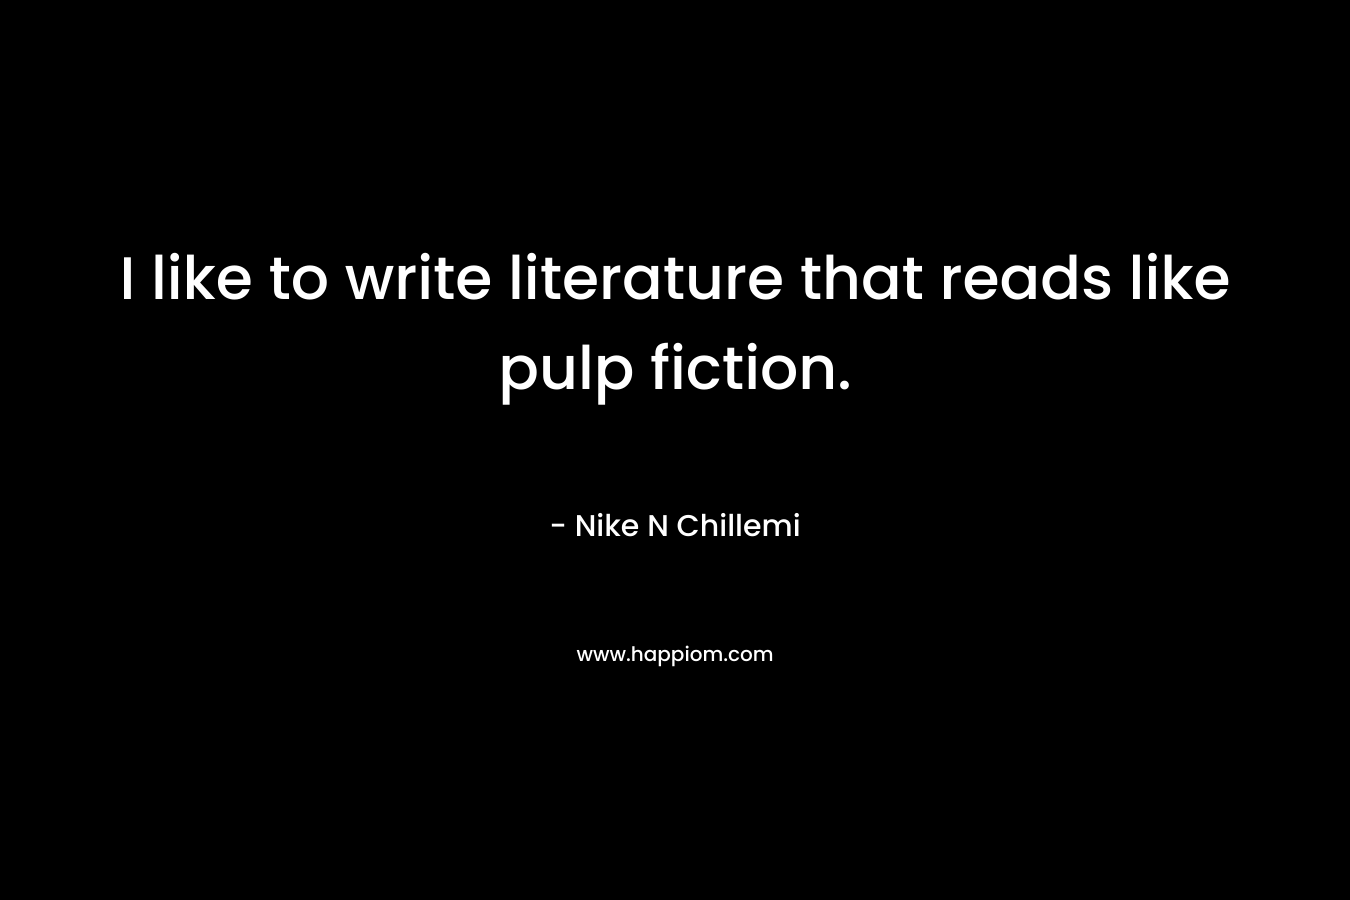 I like to write literature that reads like pulp fiction. – Nike N Chillemi